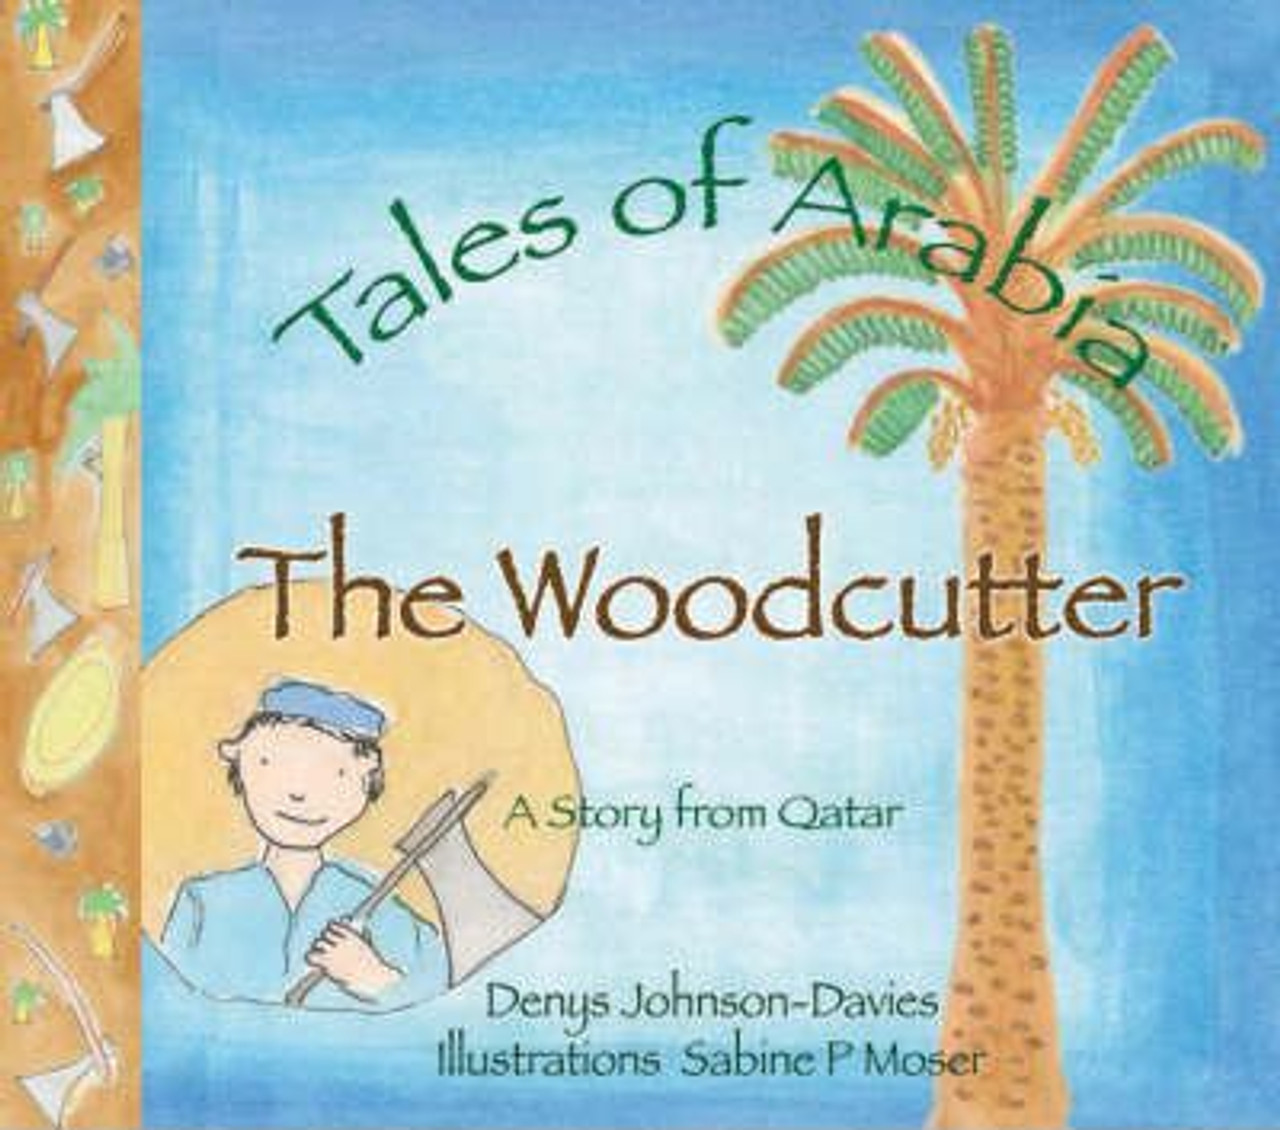 Denys Johnson-Davies / The Woodcutter (Children's Coffee Table book)